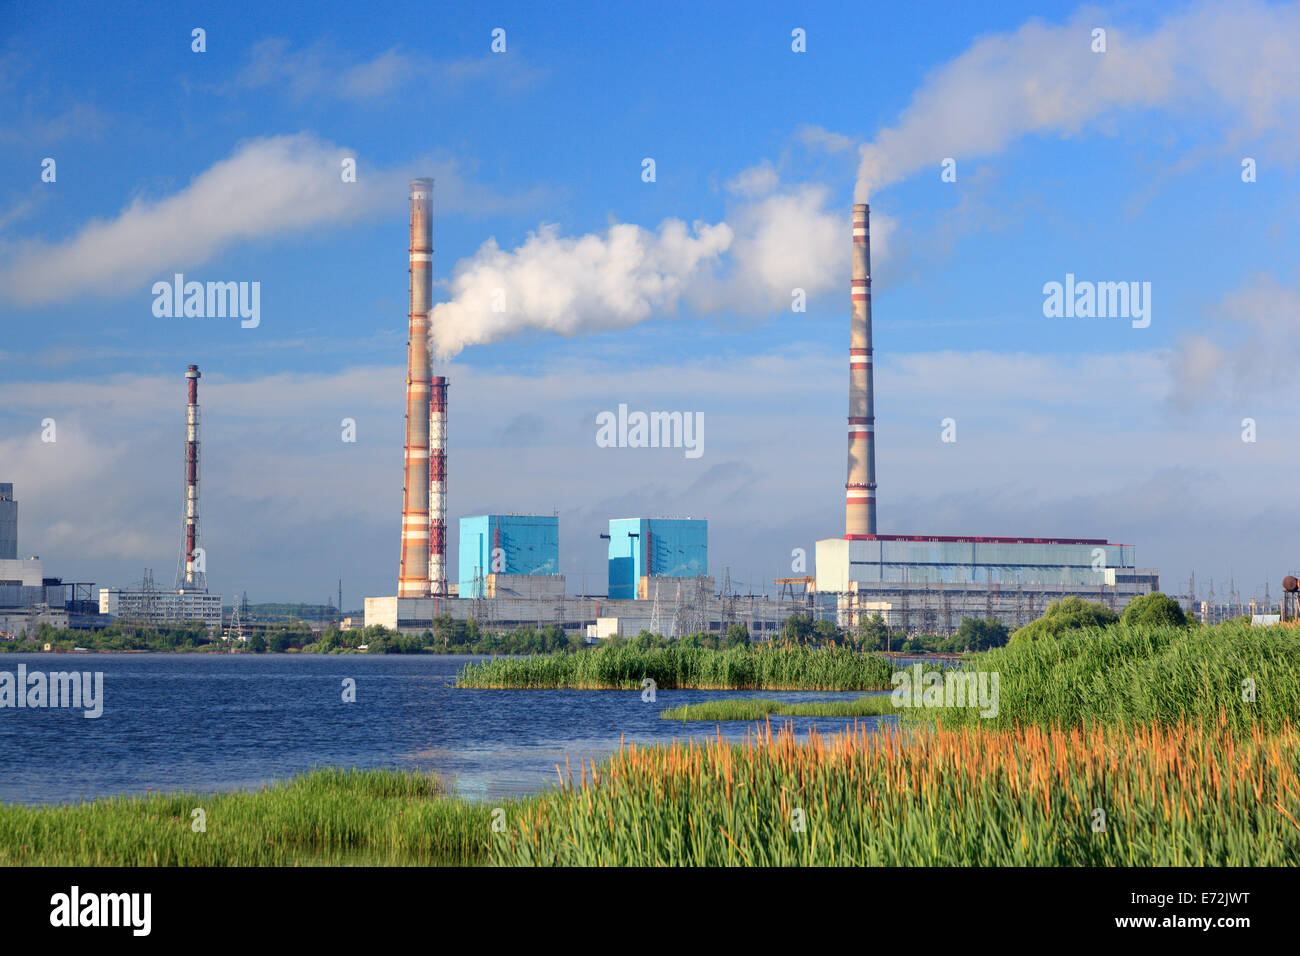 Ryazan Power Station. The power station is located in Novomichurinsk of the Ryazan Oblast, Russia. Stock Photo